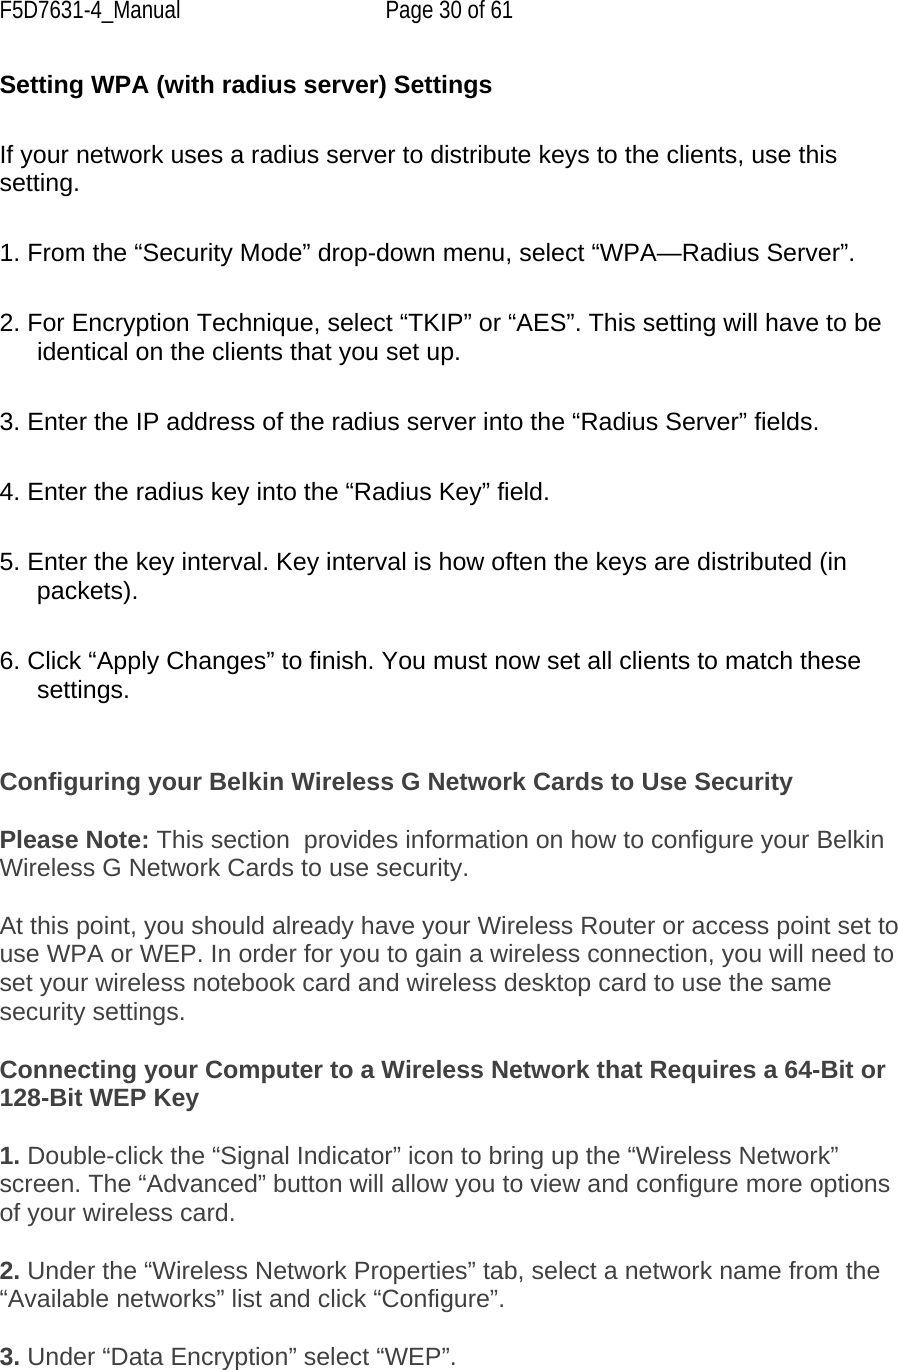 F5D7631-4_Manual  Page 30 of 61 Setting WPA (with radius server) Settings  If your network uses a radius server to distribute keys to the clients, use this setting.   1. From the “Security Mode” drop-down menu, select “WPA—Radius Server”.  2. For Encryption Technique, select “TKIP” or “AES”. This setting will have to be identical on the clients that you set up.  3. Enter the IP address of the radius server into the “Radius Server” fields.  4. Enter the radius key into the “Radius Key” field.  5. Enter the key interval. Key interval is how often the keys are distributed (in packets).  6. Click “Apply Changes” to finish. You must now set all clients to match these settings.   Configuring your Belkin Wireless G Network Cards to Use Security   Please Note: This section  provides information on how to configure your Belkin Wireless G Network Cards to use security.  At this point, you should already have your Wireless Router or access point set to use WPA or WEP. In order for you to gain a wireless connection, you will need to set your wireless notebook card and wireless desktop card to use the same security settings.  Connecting your Computer to a Wireless Network that Requires a 64-Bit or 128-Bit WEP Key  1. Double-click the “Signal Indicator” icon to bring up the “Wireless Network” screen. The “Advanced” button will allow you to view and configure more options of your wireless card.  2. Under the “Wireless Network Properties” tab, select a network name from the “Available networks” list and click “Configure”.   3. Under “Data Encryption” select “WEP”.  